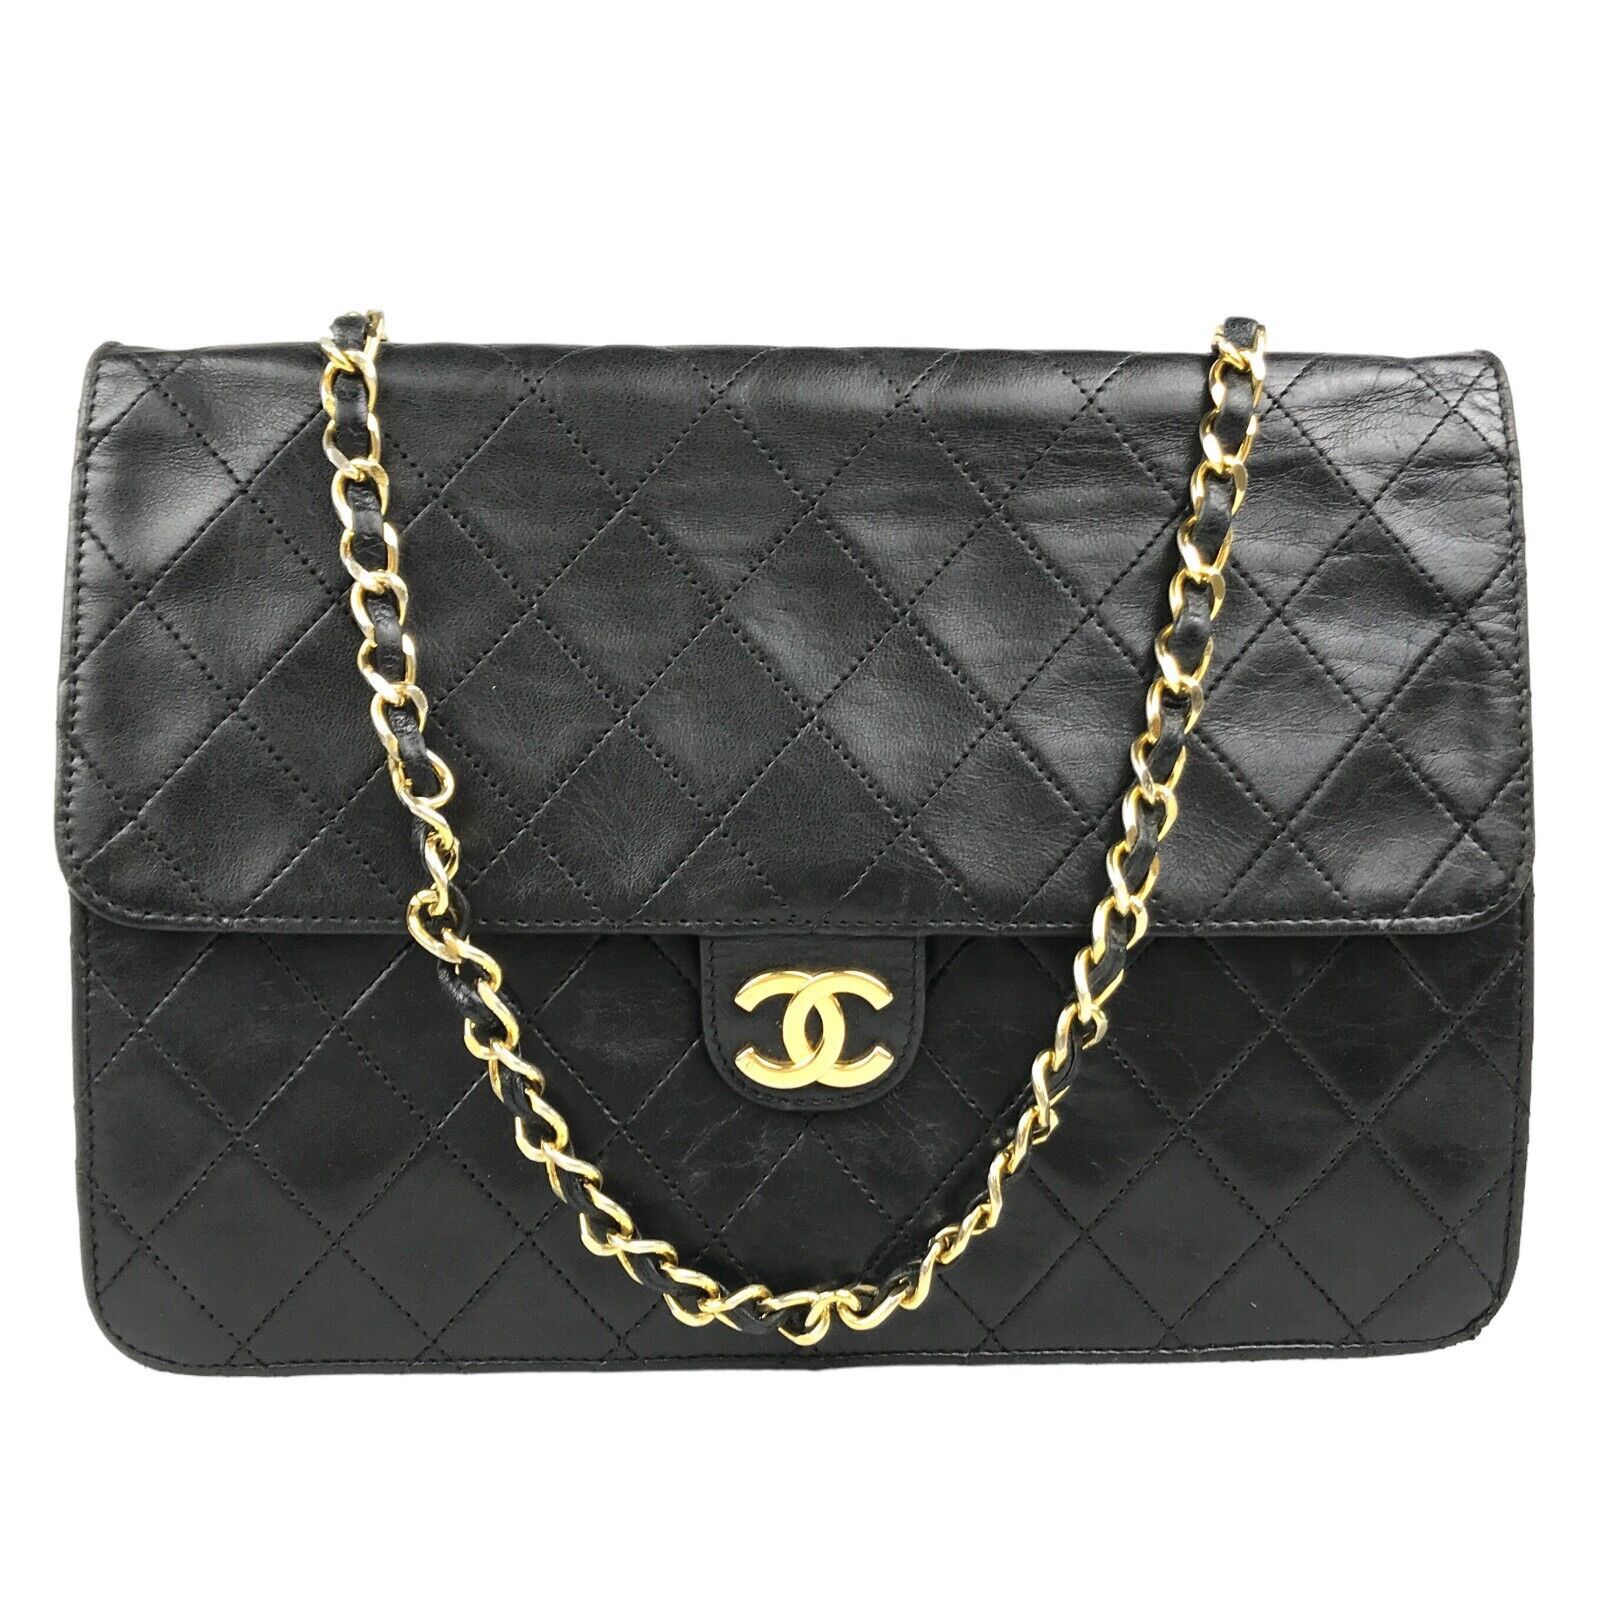 used authentic chanel bag